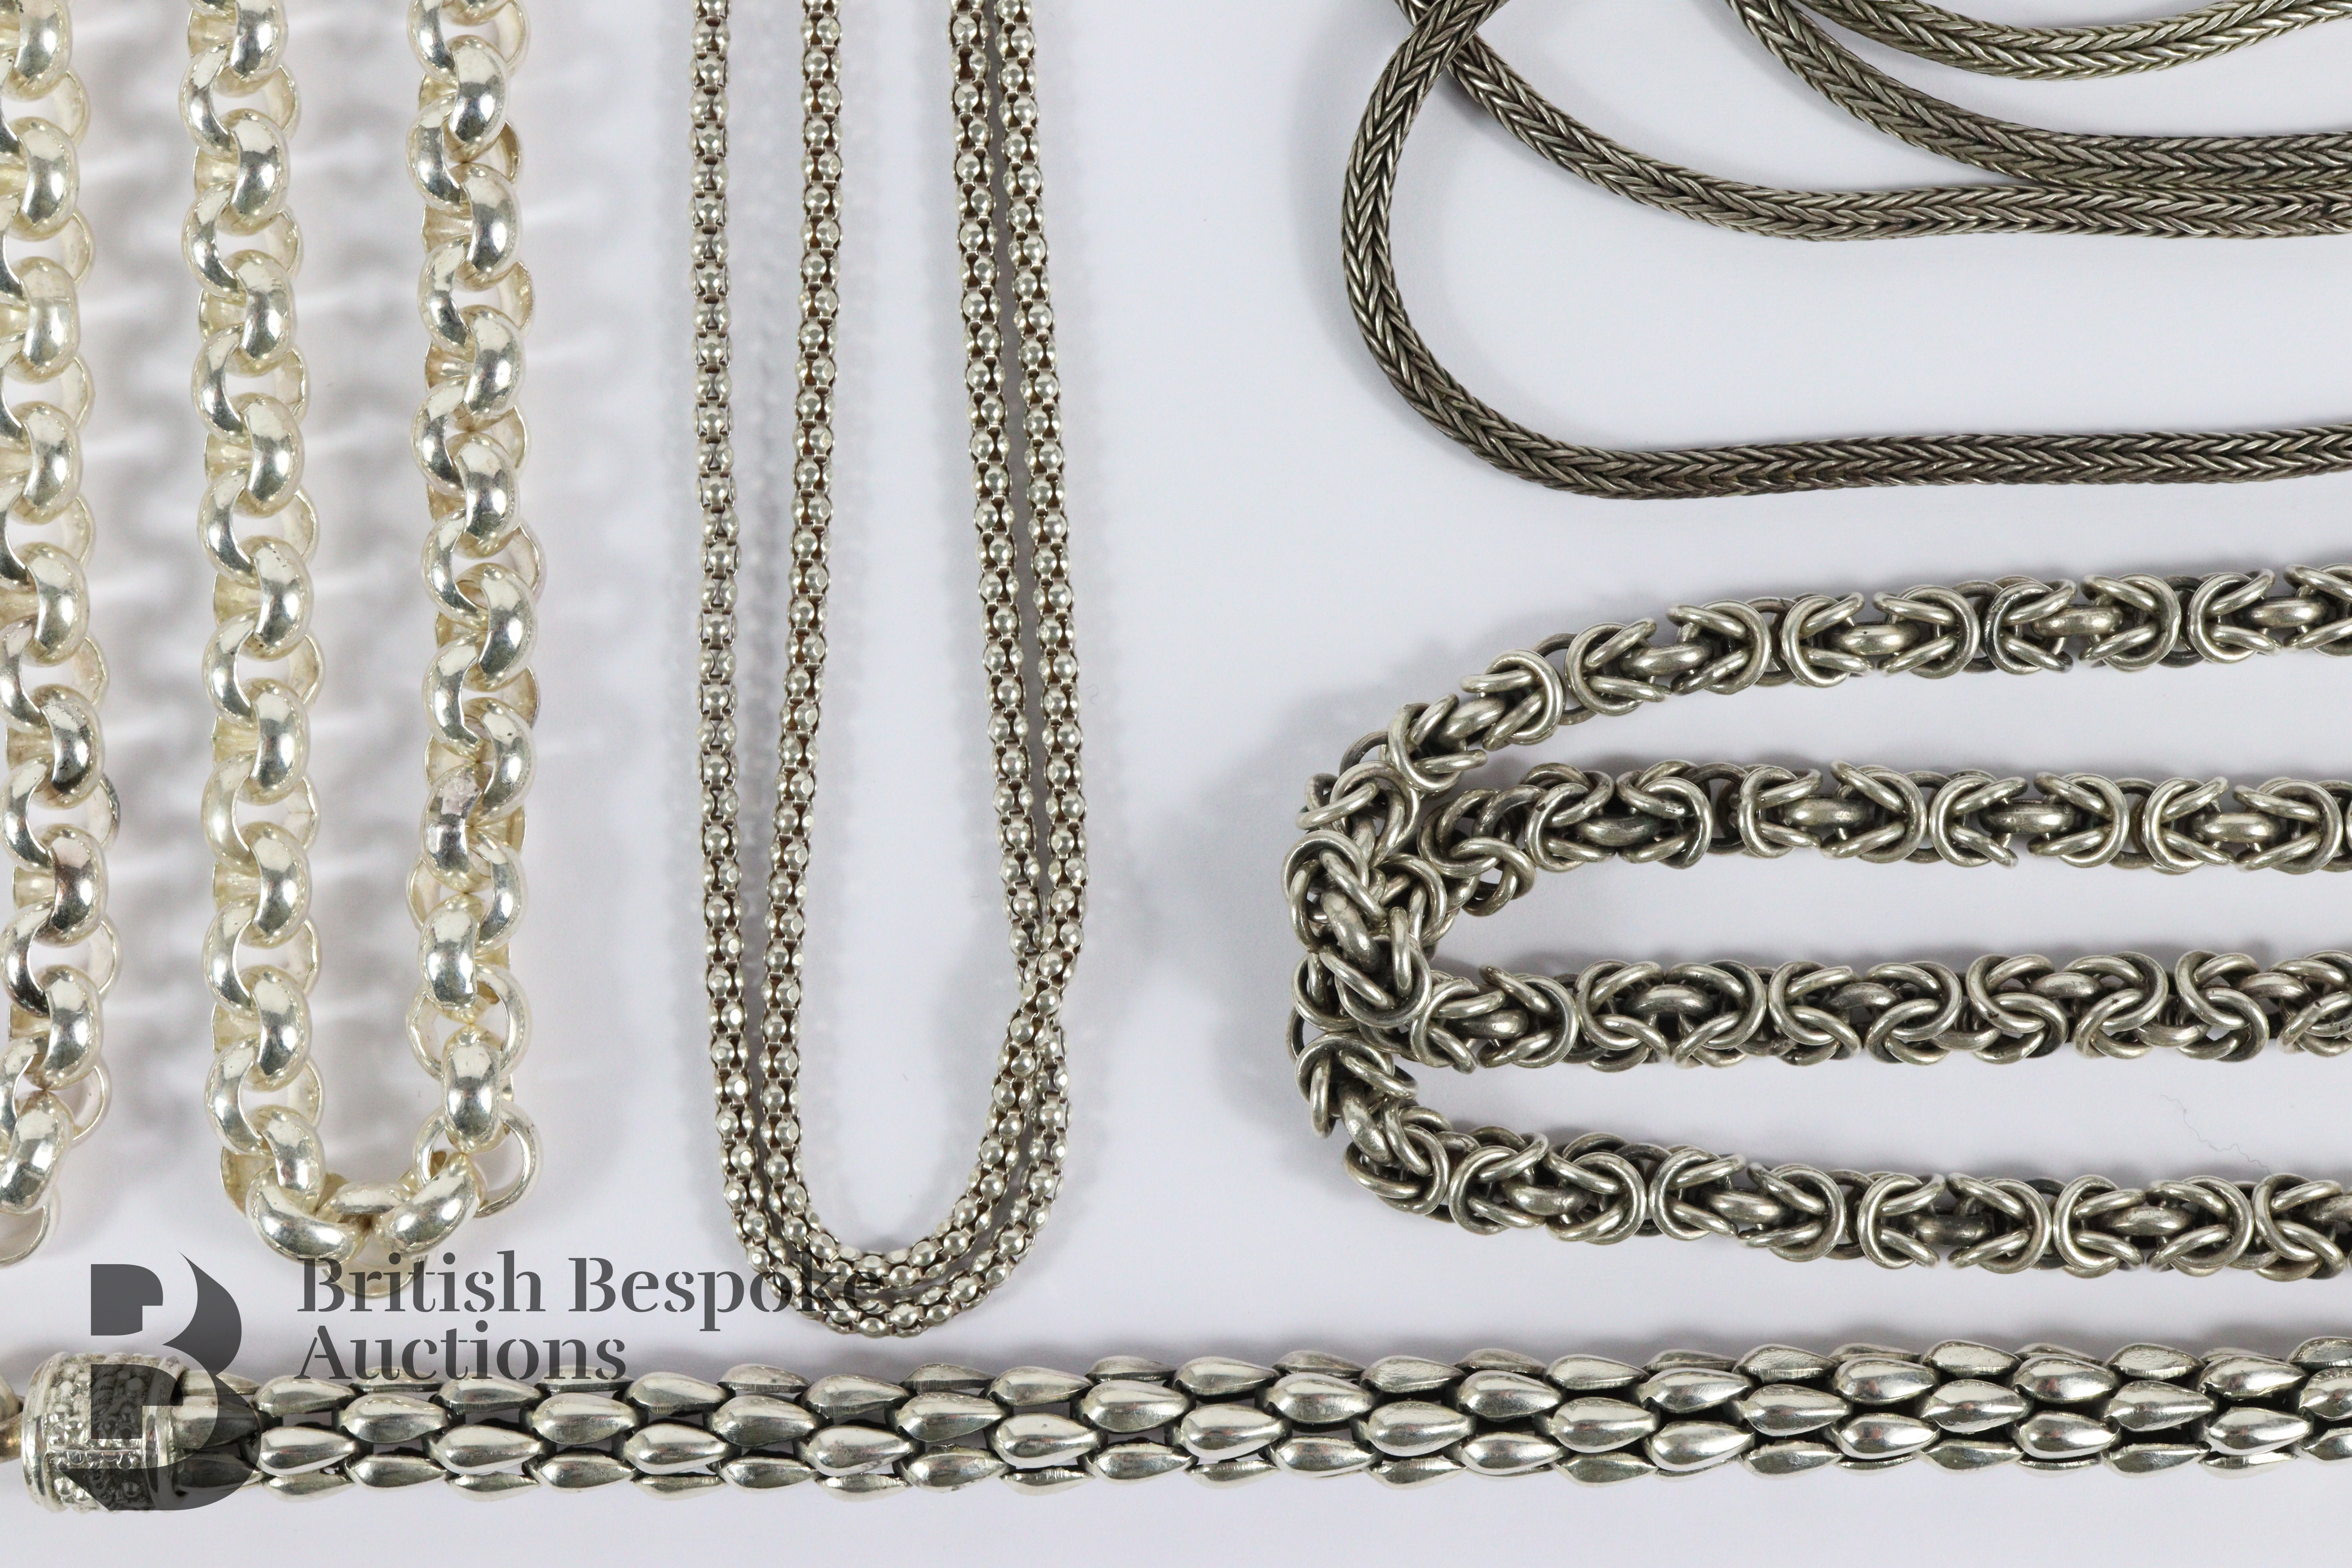 Heavy Silver Chains - Image 2 of 2